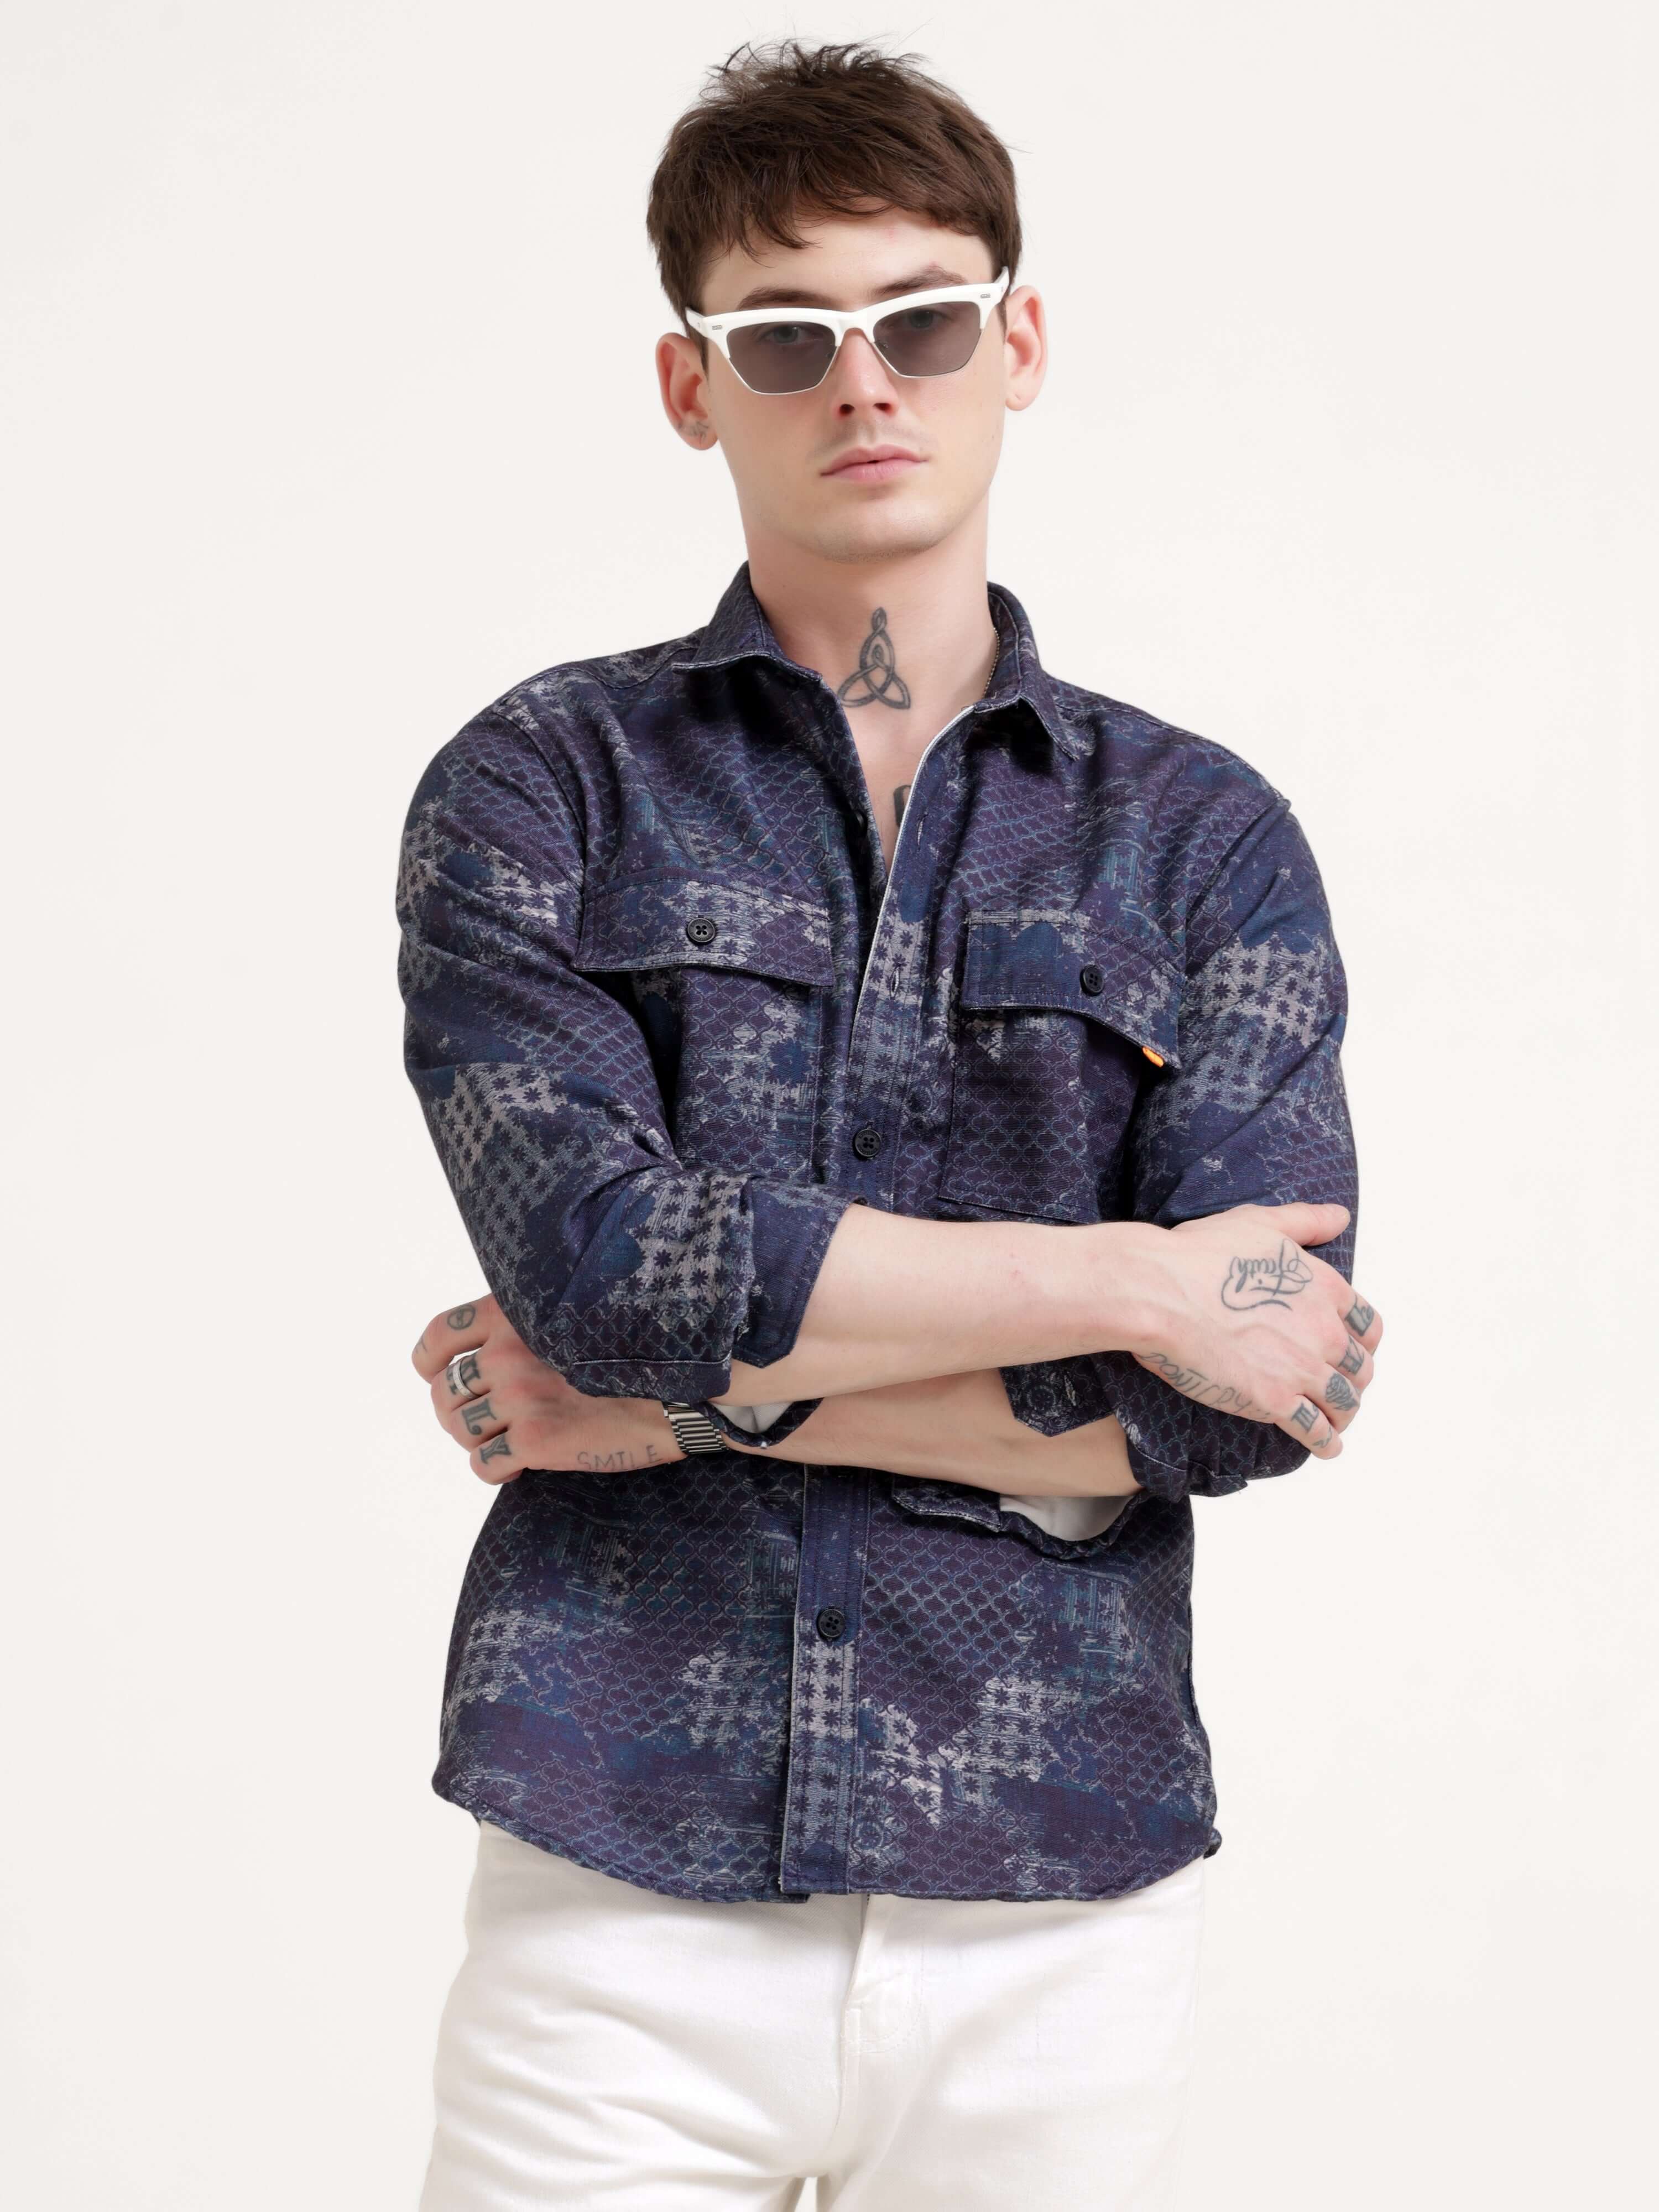 Geometric abstract indigo Overshirt - Men's Casual Wear shop online at Estilocus. Elevate your style with our Indigo Geometric Overshirt. Perfect for any casual occasion, featuring a regular fit and unique abstract design.